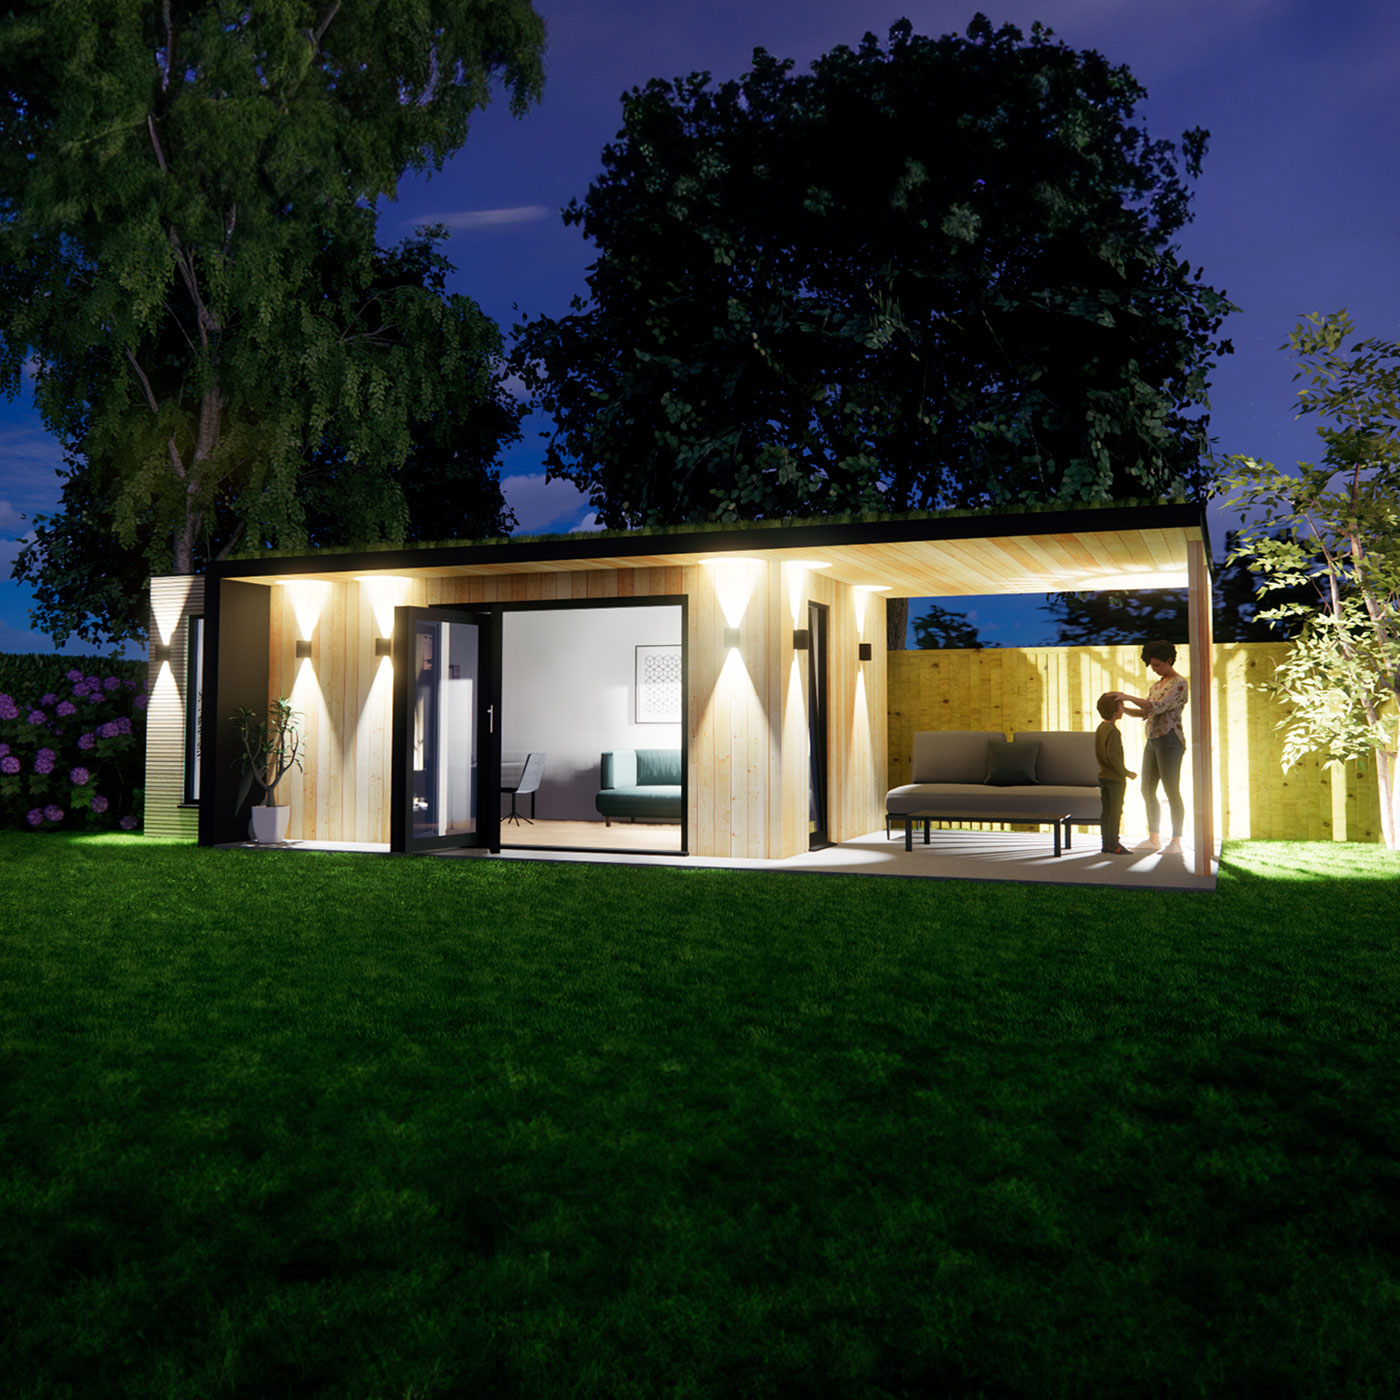 3D visualisation of garden office with roof overhang 3.0m by 6.2m